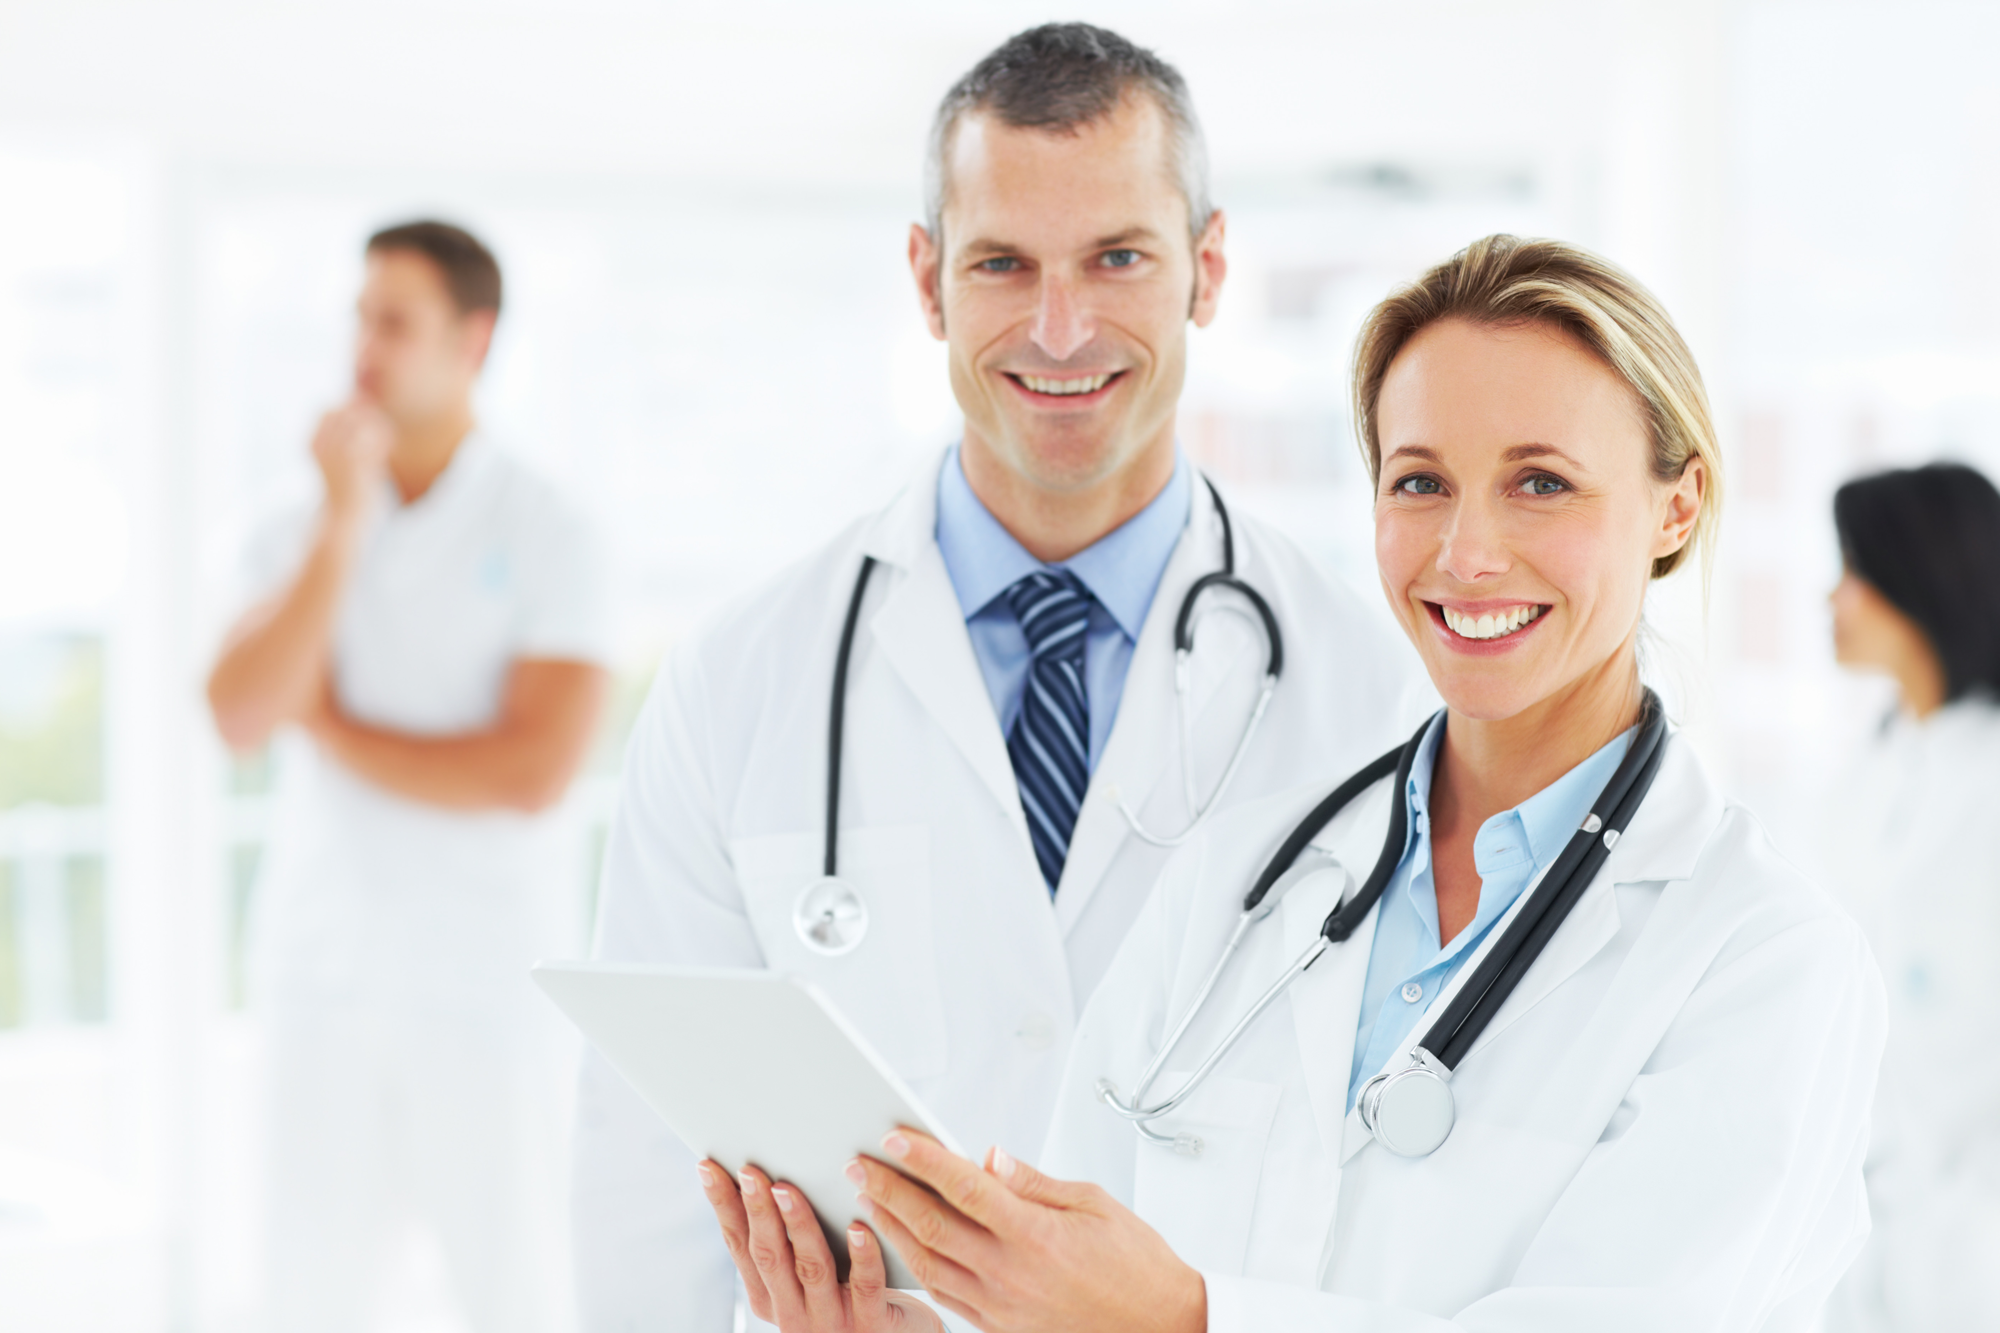 5 Insights into Private Practice Physicians